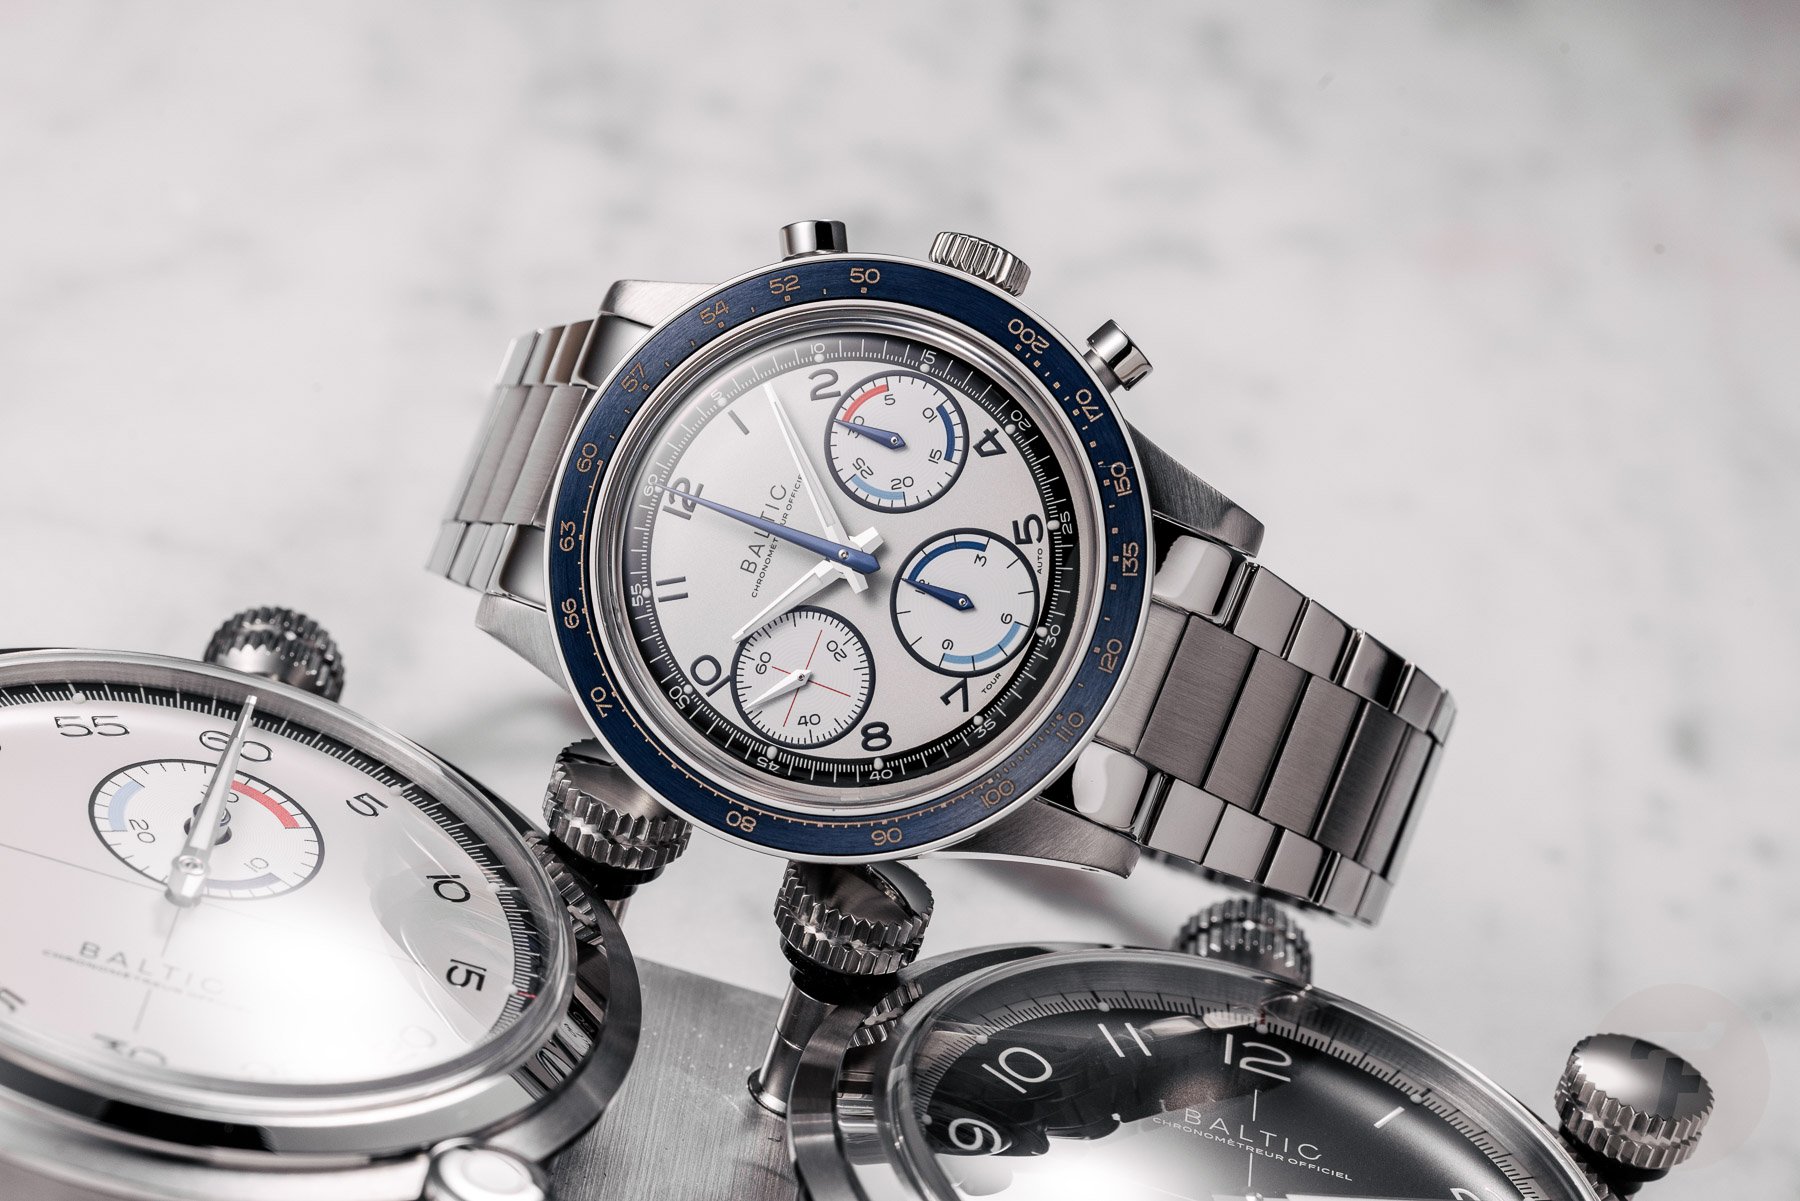 Introducing: The Baltic × Tour Auto 2024 Tricompax — This Chronograph Is Ready For The Classic Road Rally